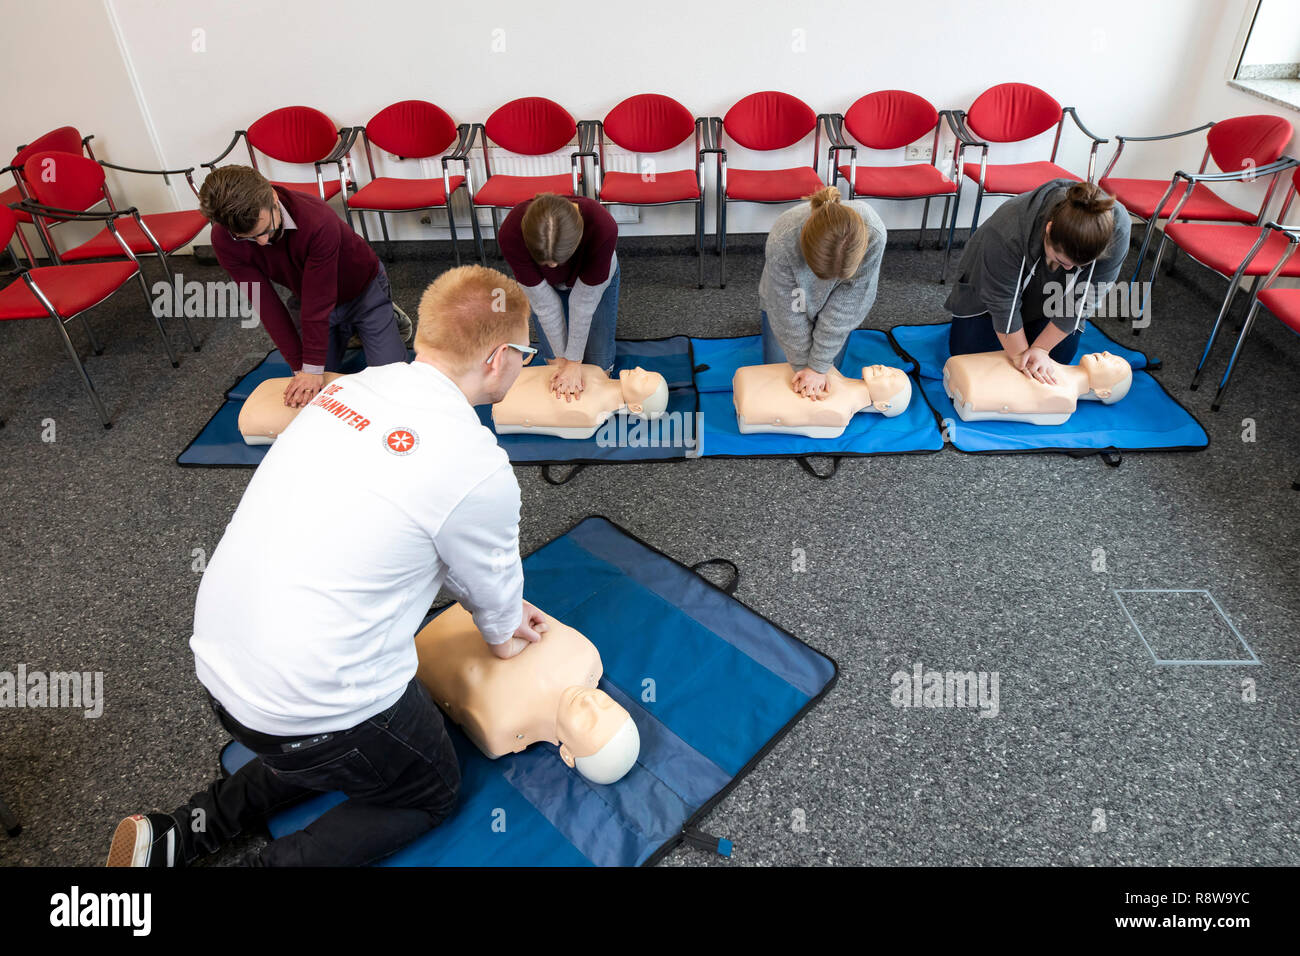 First aid course, first aid training in emergencies, emergencies, practice training, resuscitation, cardiopulmonary resuscitation, exercise doll, Stock Photo